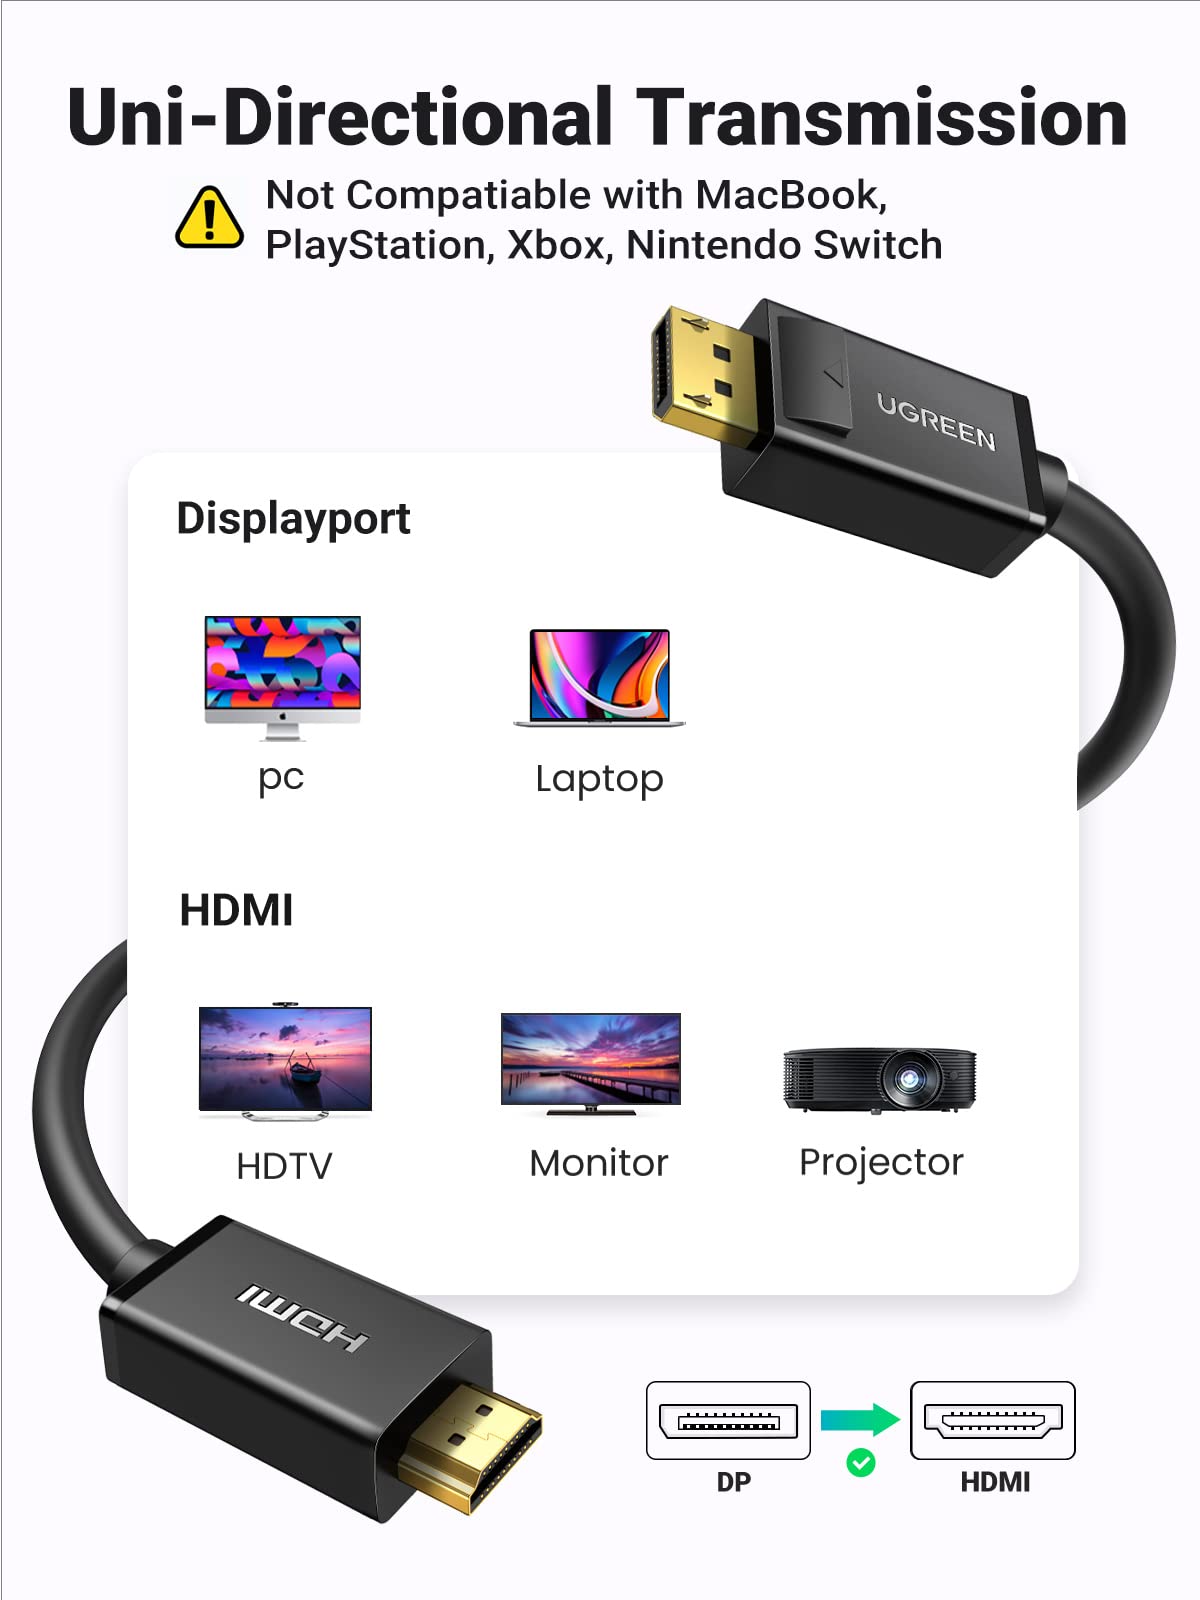 UGREEN 4K Displayport to HDMI Cable 1080P 120Hz, 2K 60Hz Uni-Directional DP to HDMI Cord Display Port to HDMI Connector Video Display Passive Cable Compatible with Dell, GPU, AMD, Nvidia, 10FT